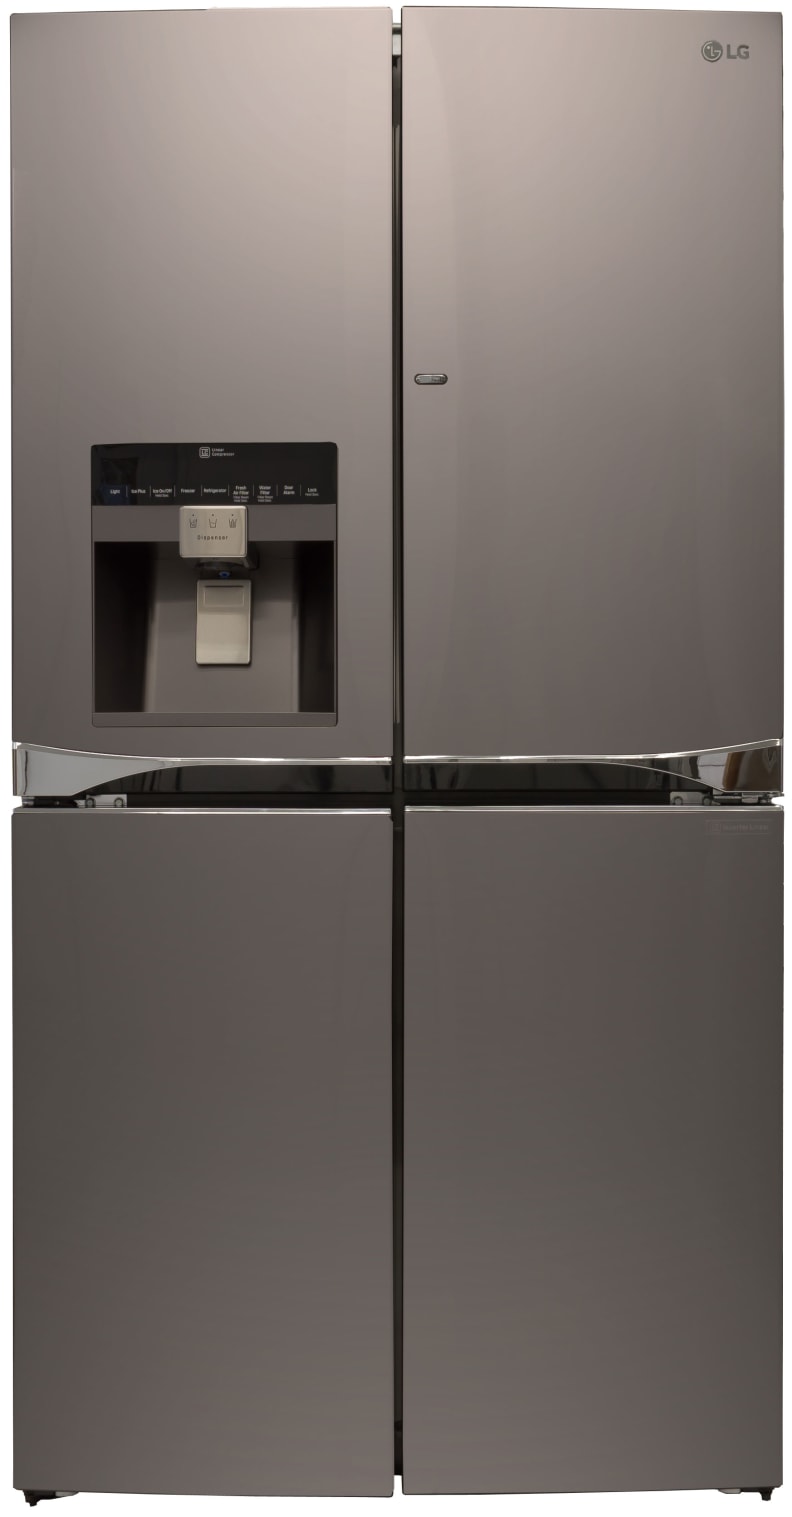 It's stainless, but not quite... the LPXS30866D four-door fridge is part of LG's new Diamond Collection.